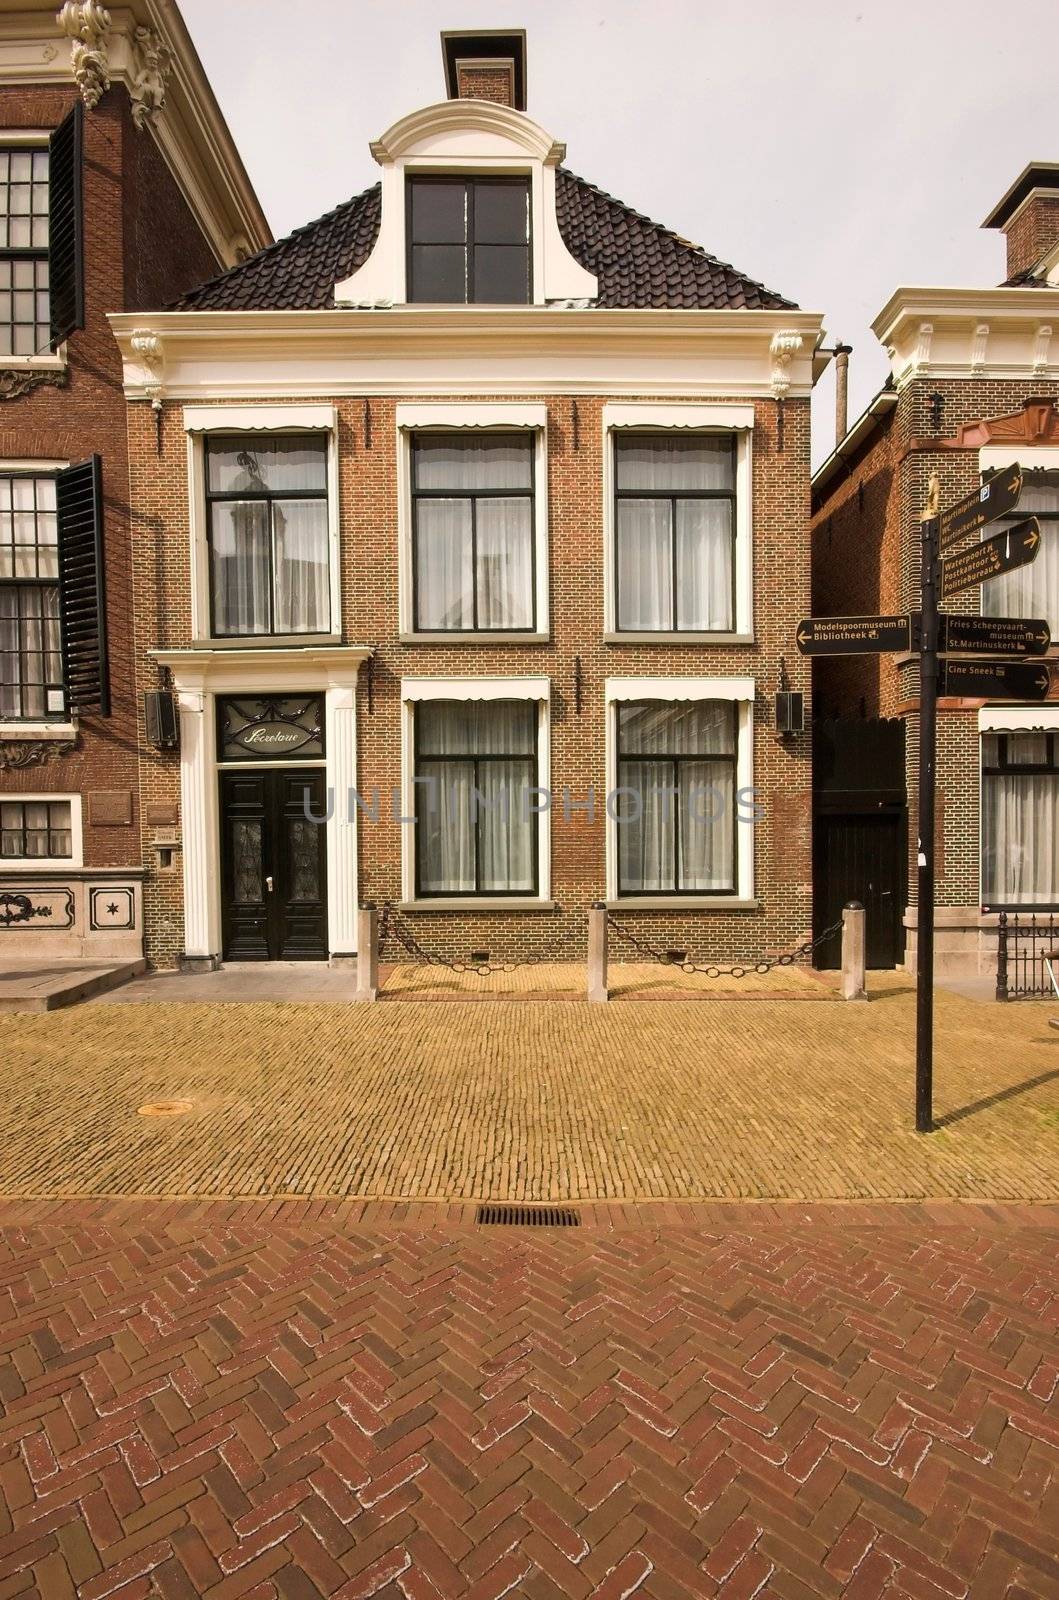 Old XIX-century residential house in Dutch style, in the city centre of Sneek, Holland